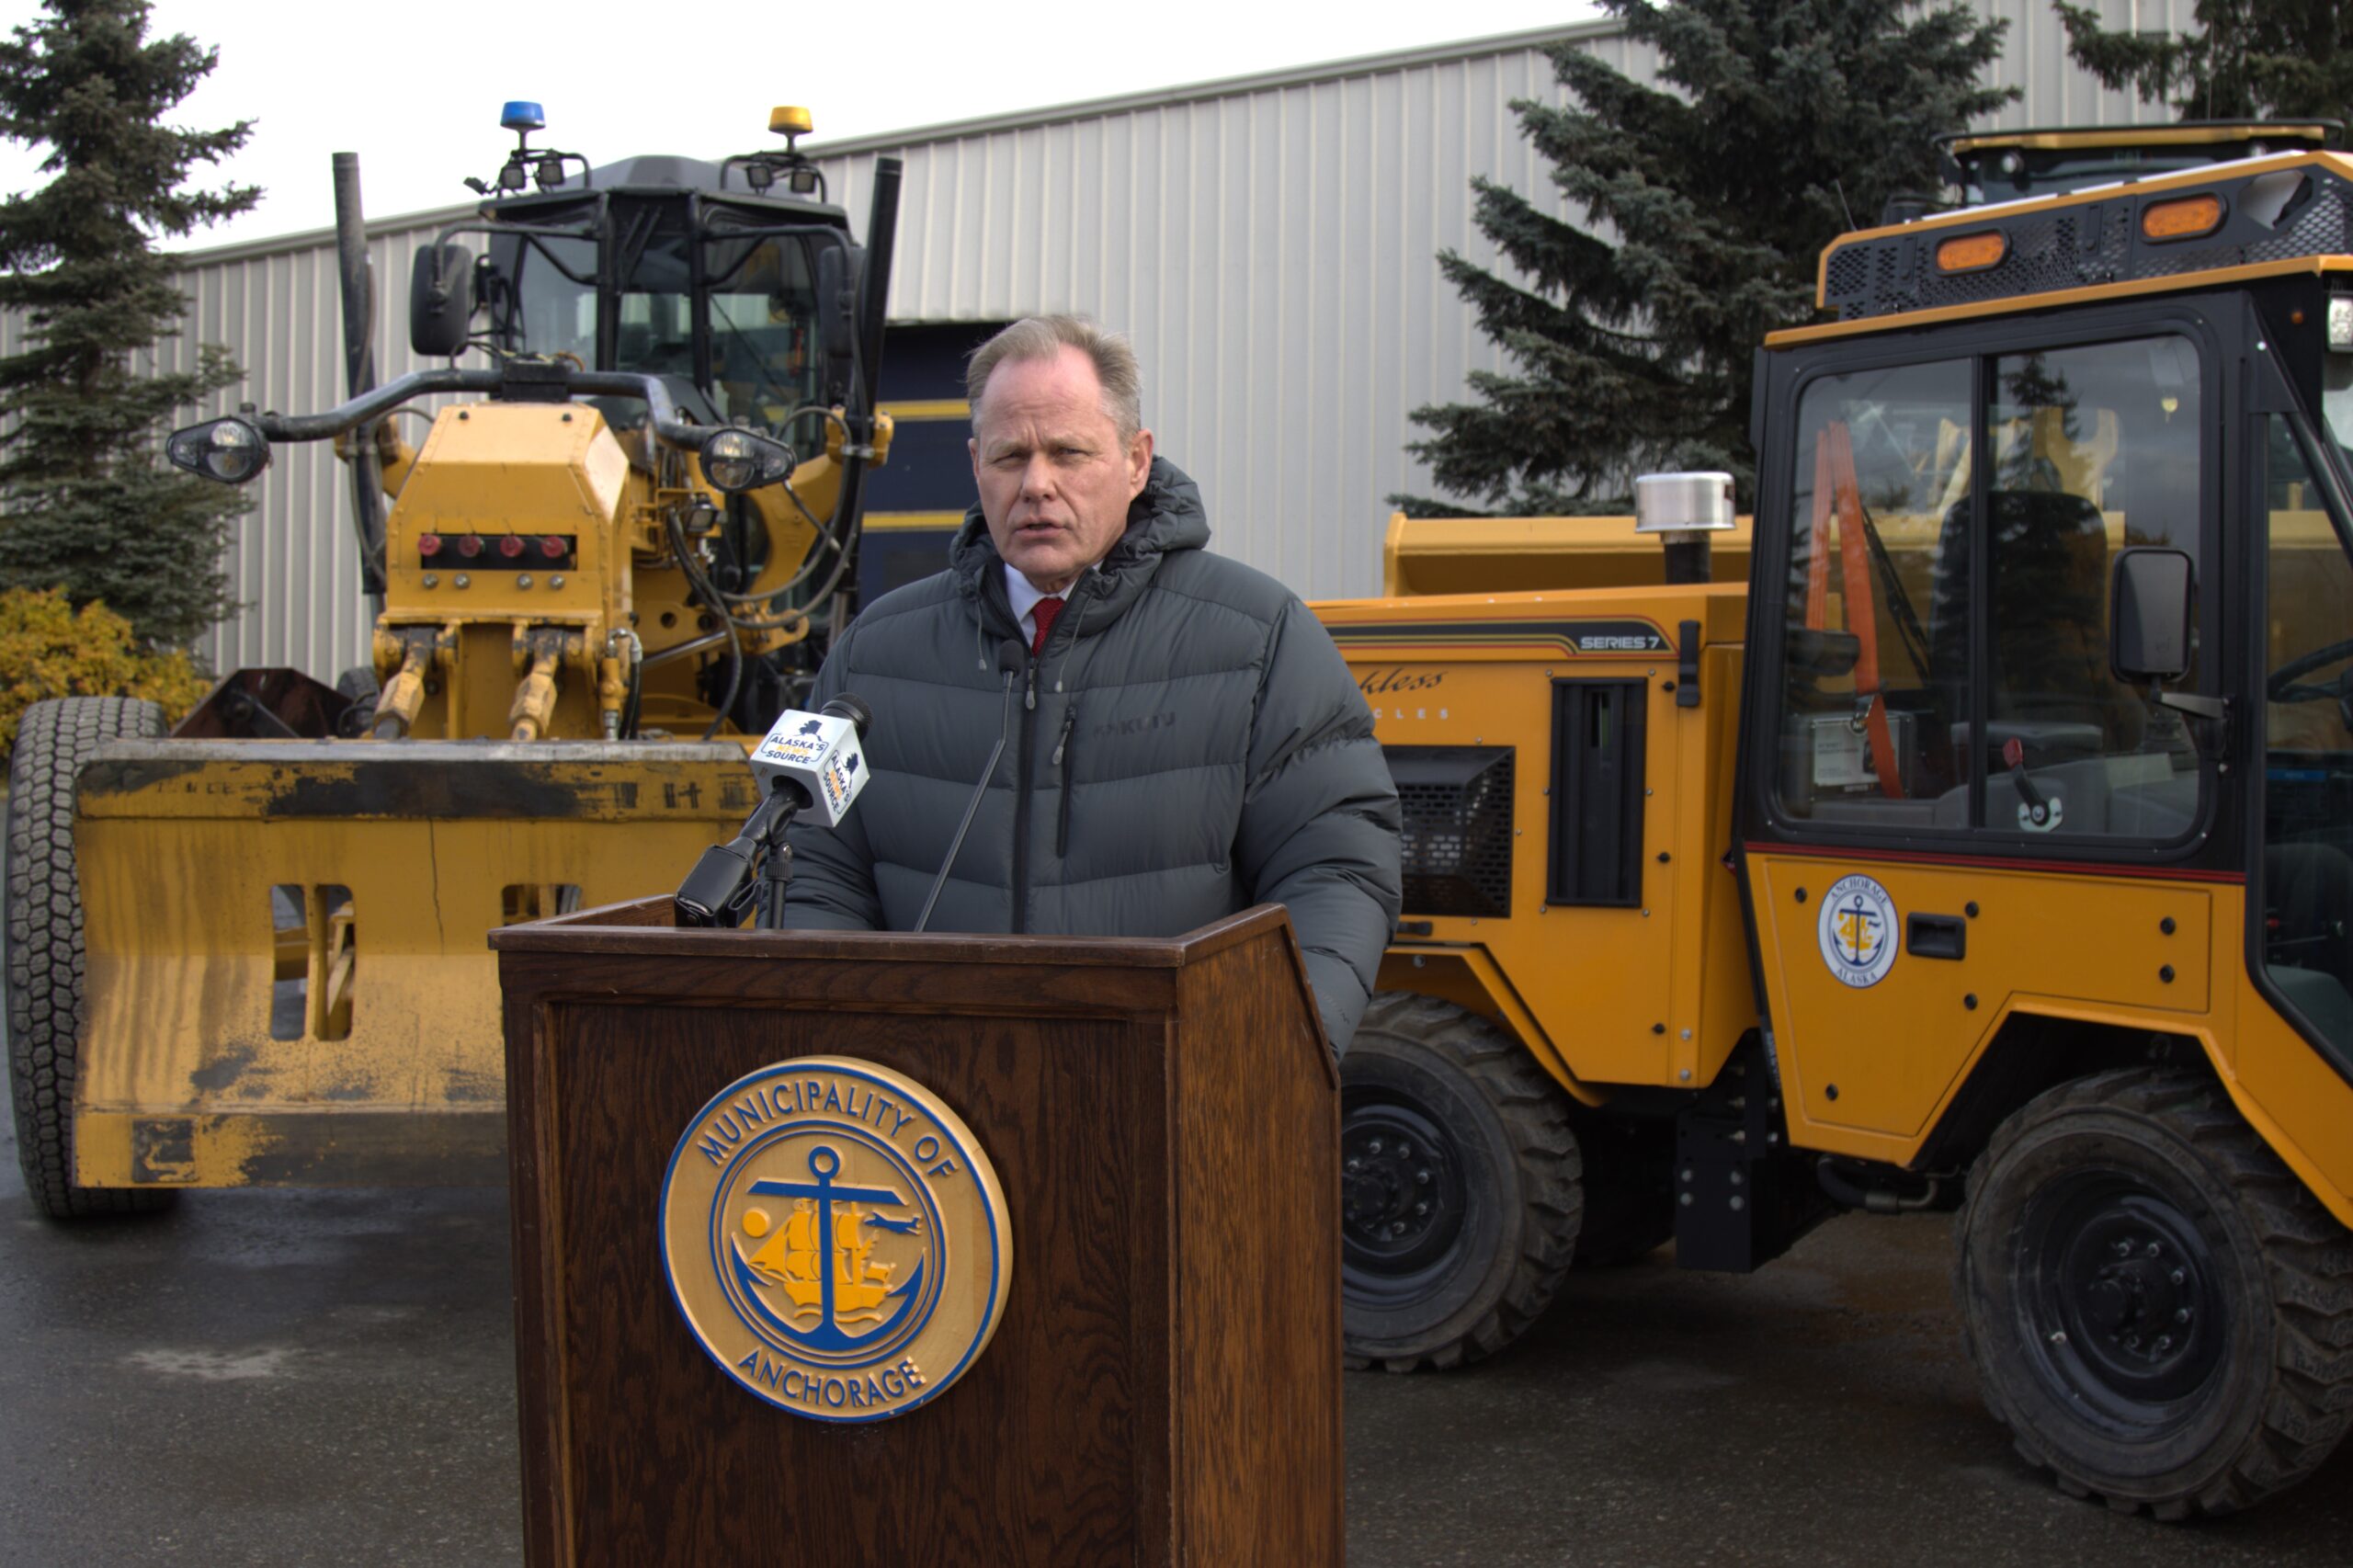 a man speaks from a podium set up by heavy equipment